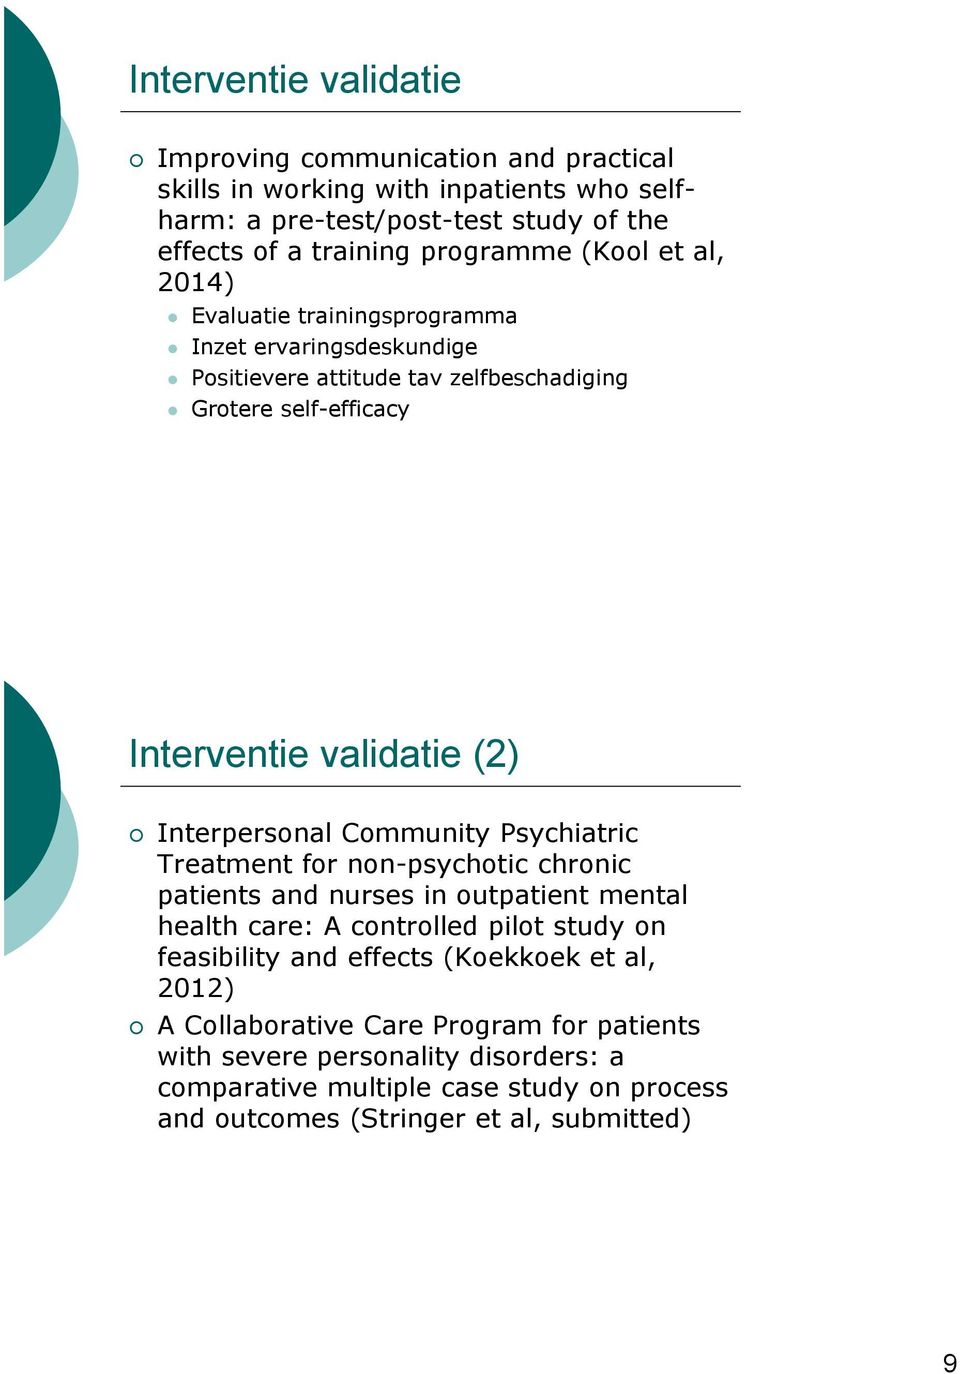 Interpersonal Community Psychiatric Treatment for non-psychotic chronic patients and nurses in outpatient mental health care: A controlled pilot study on feasibility and